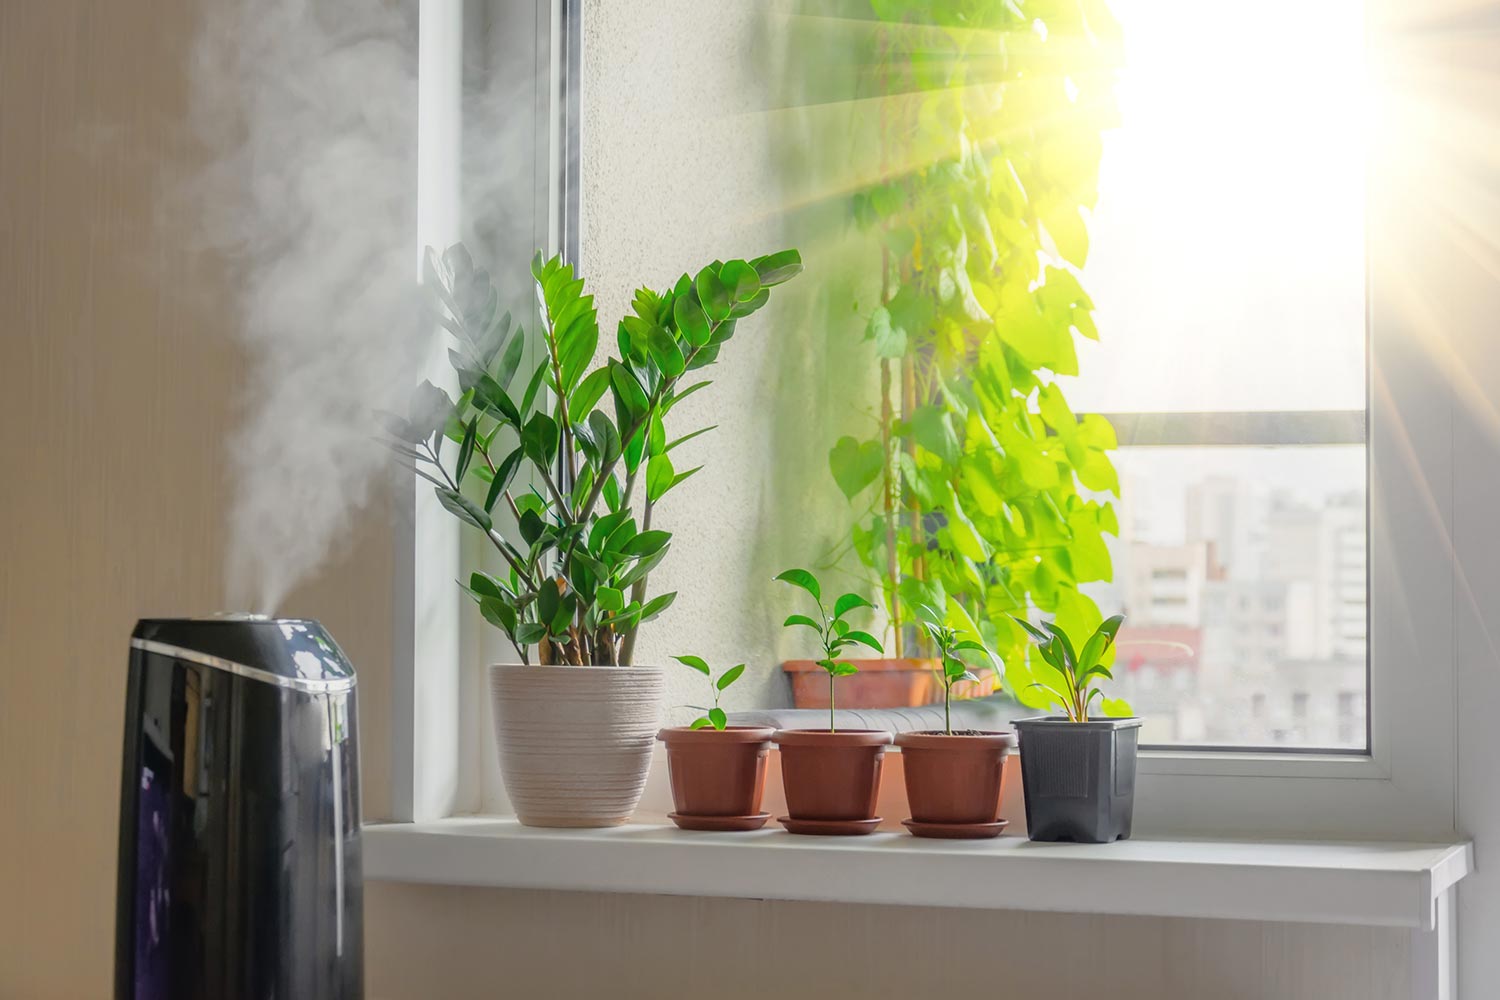 Indoor decorative and deciduous plants on the windowsill in an apartment with a steam humidifier